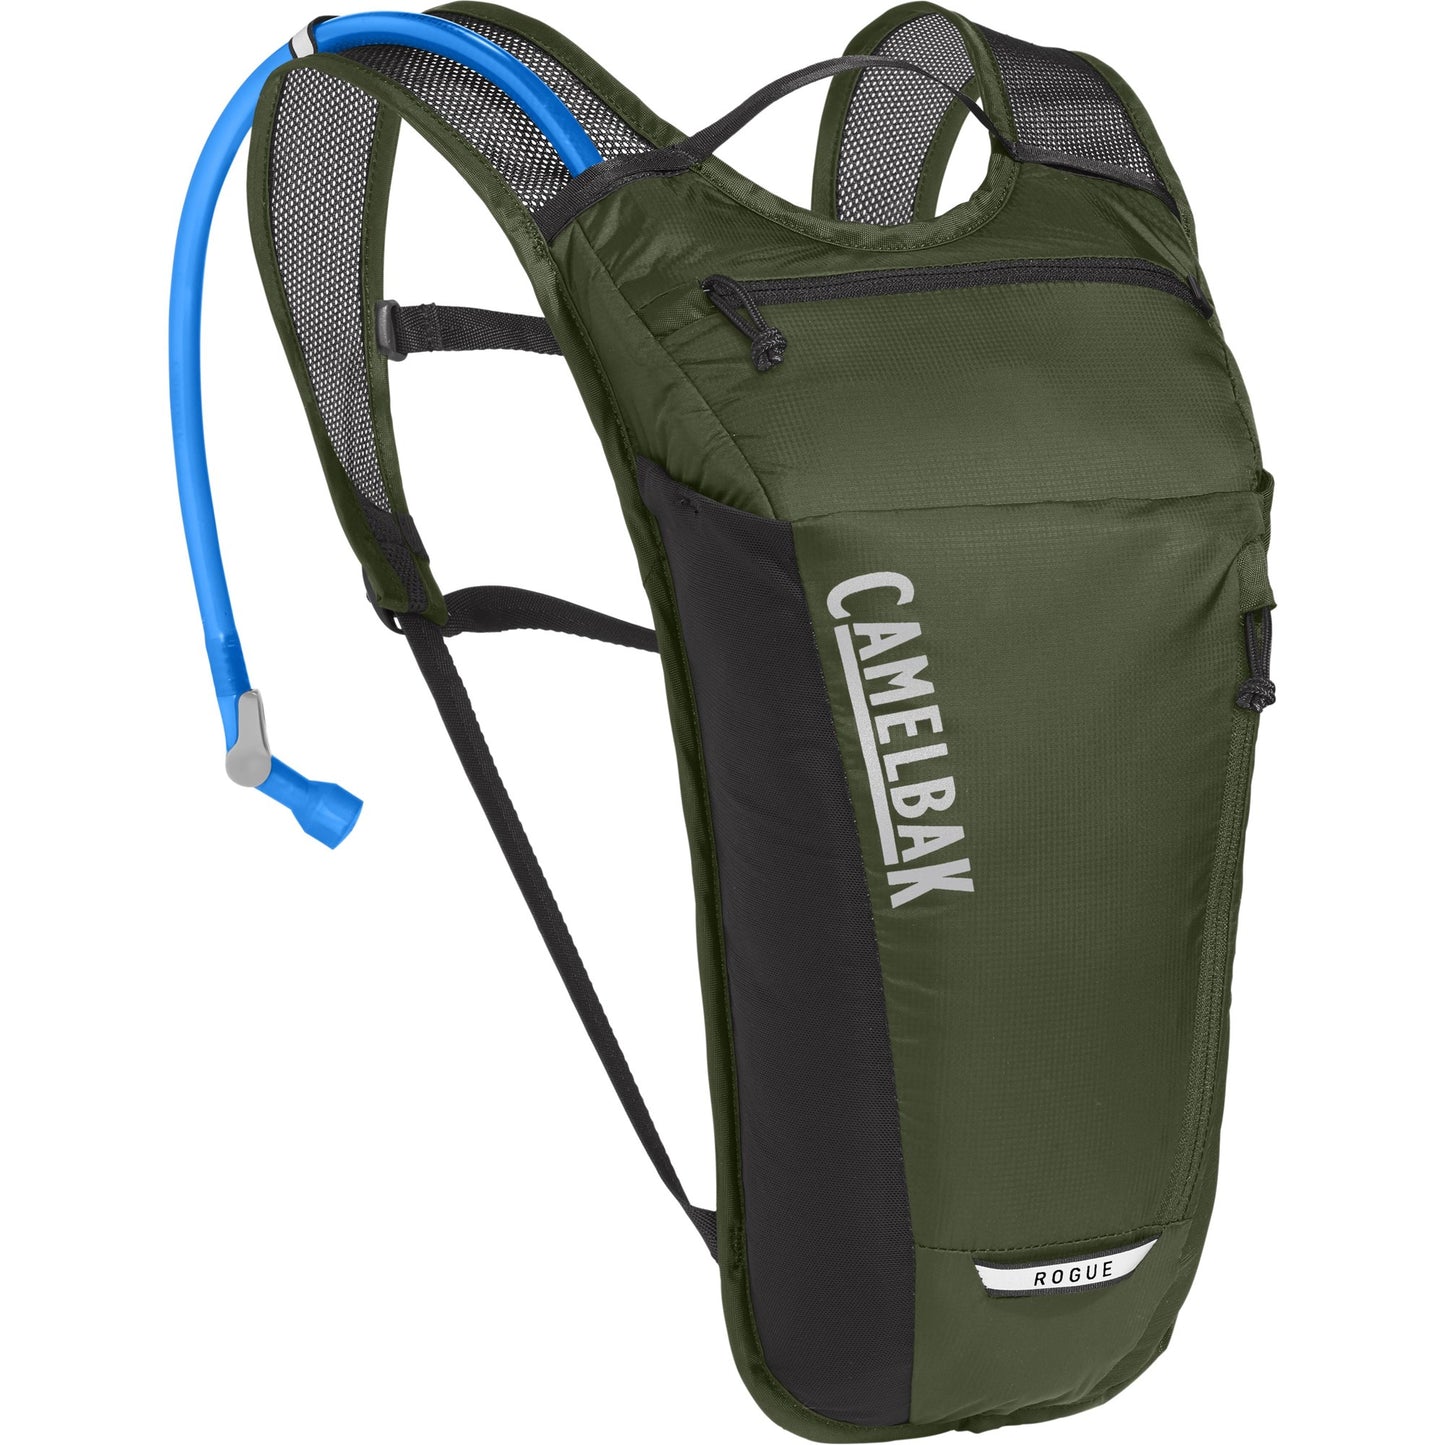 CAMELBAK ROGUE LIGHT HYDRATION BACKPACK - ARMY GREEN